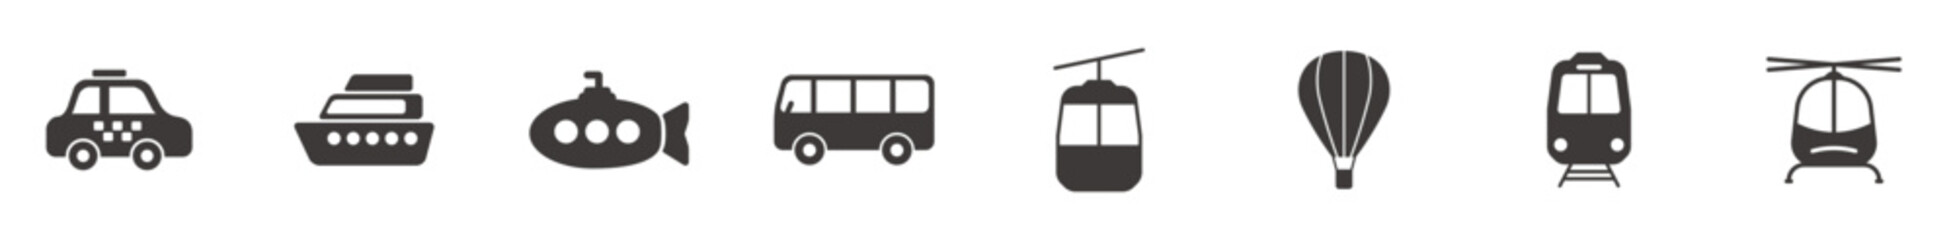 Transport icon set airplane, ship or ferry, train, public bus, helicopter, cable car symbols in flat style.